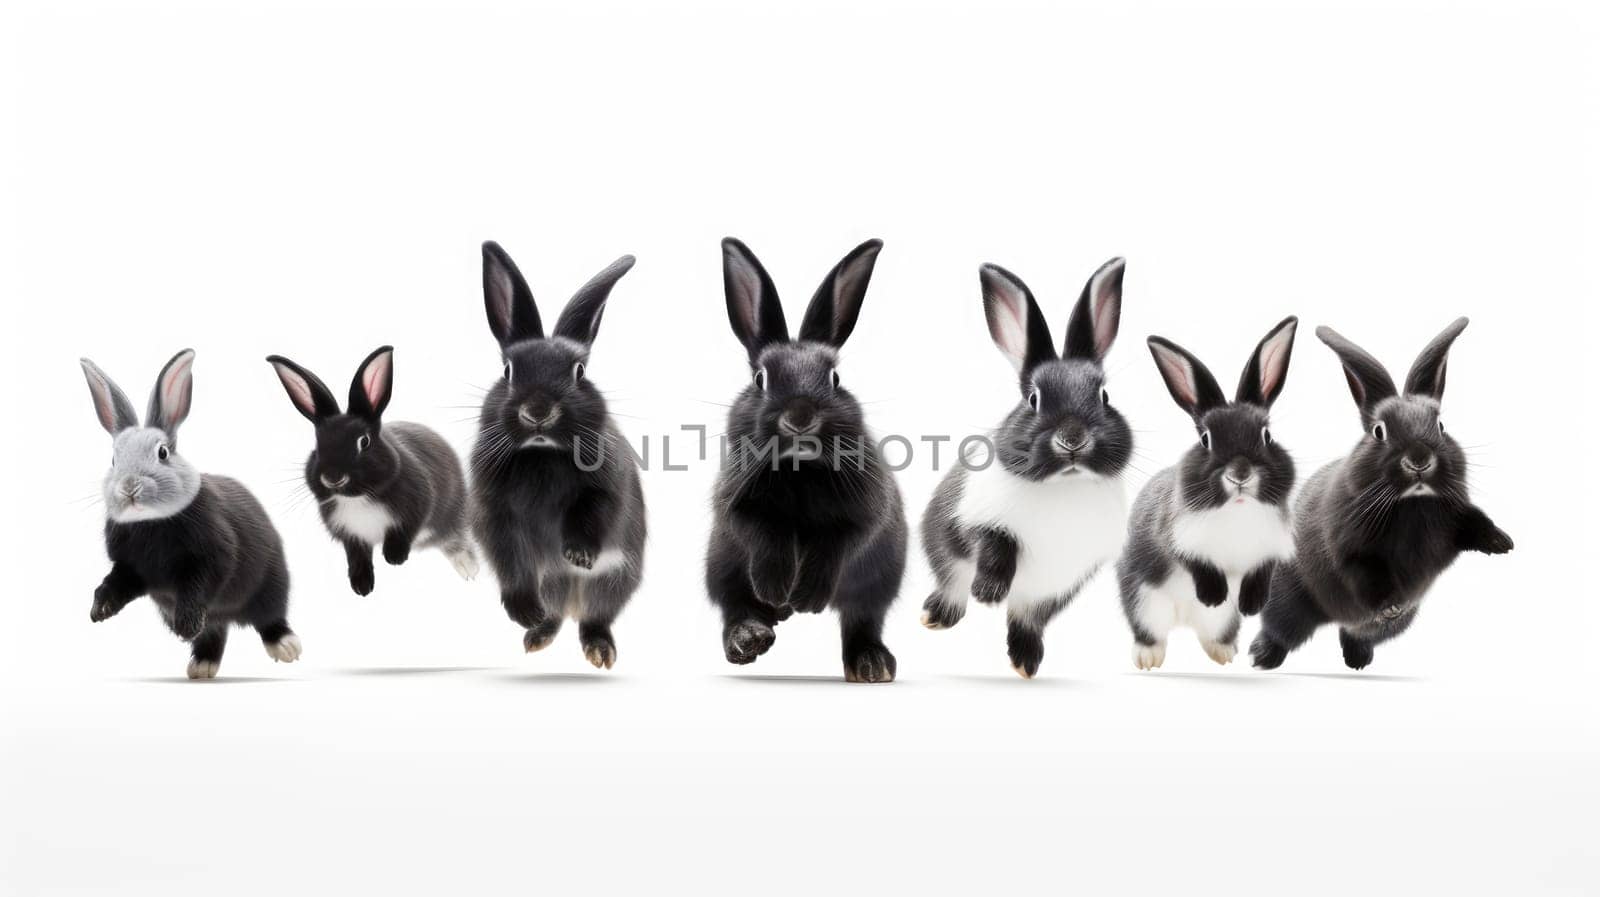 Adorable fluffy rabbits with perky ears hopping on white background by JuliaDorian